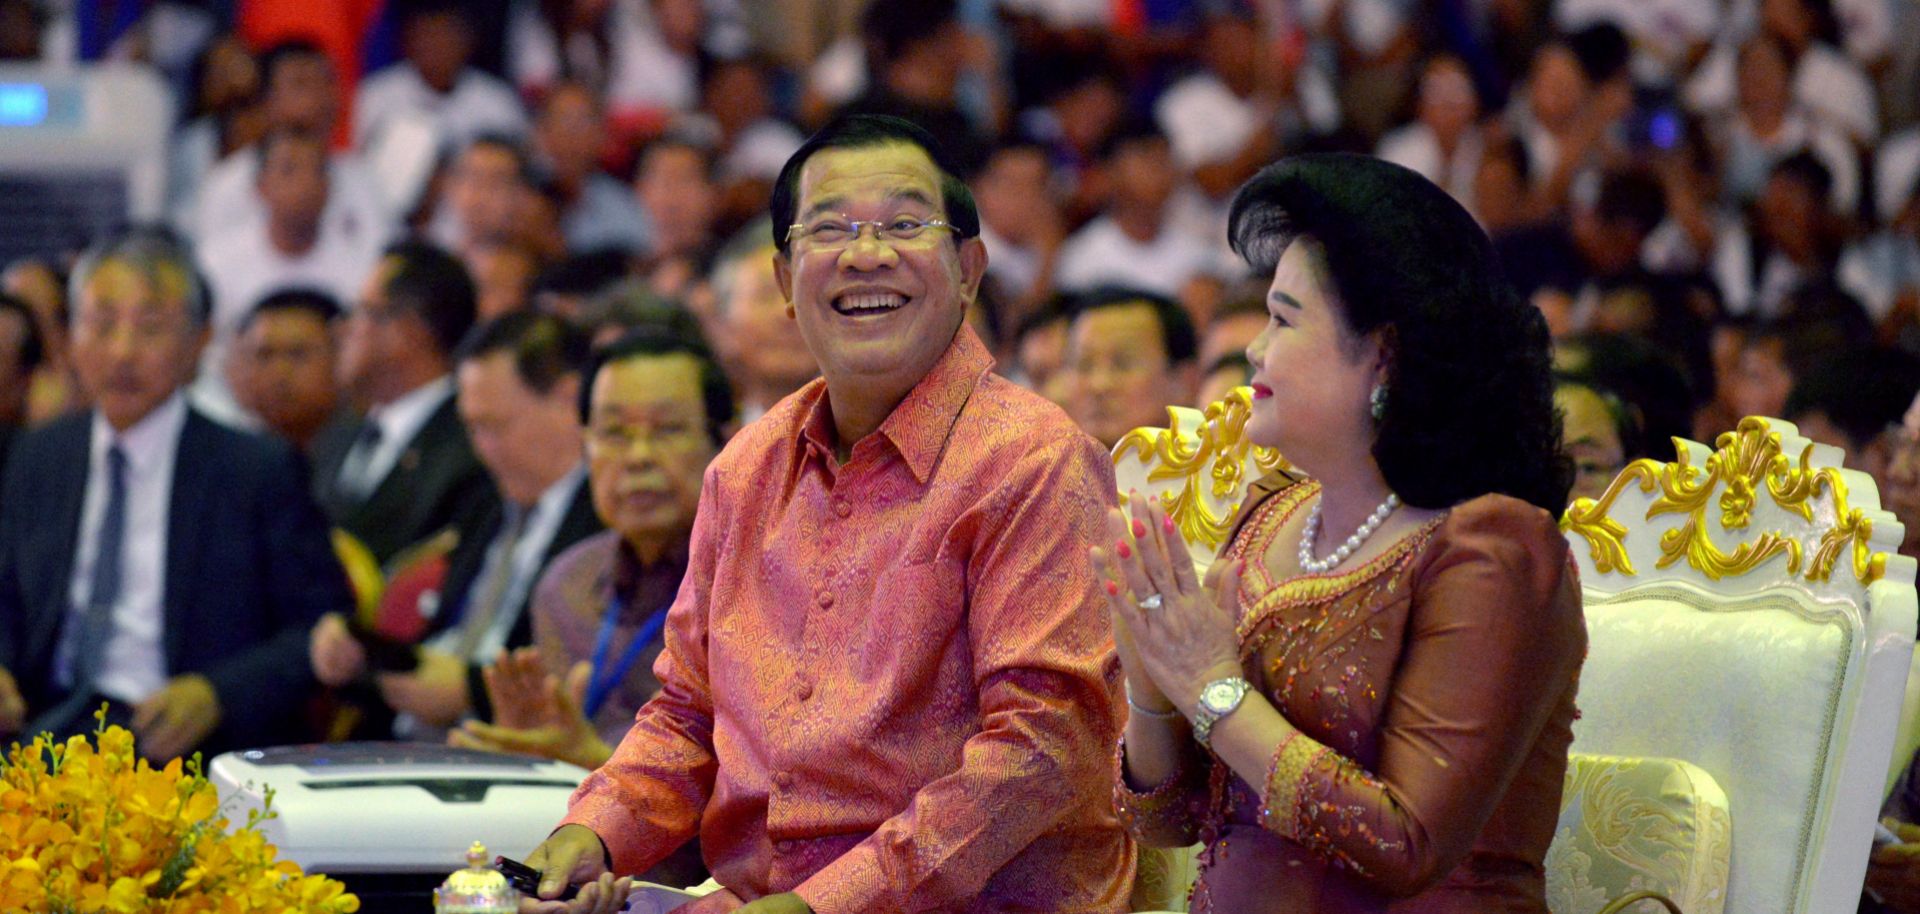 Cambodian Prime Minister Hun Sen (L) and his wife look on during a ceremony at the Olympic national stadium in Phnom Penh on July 17, 2017. 